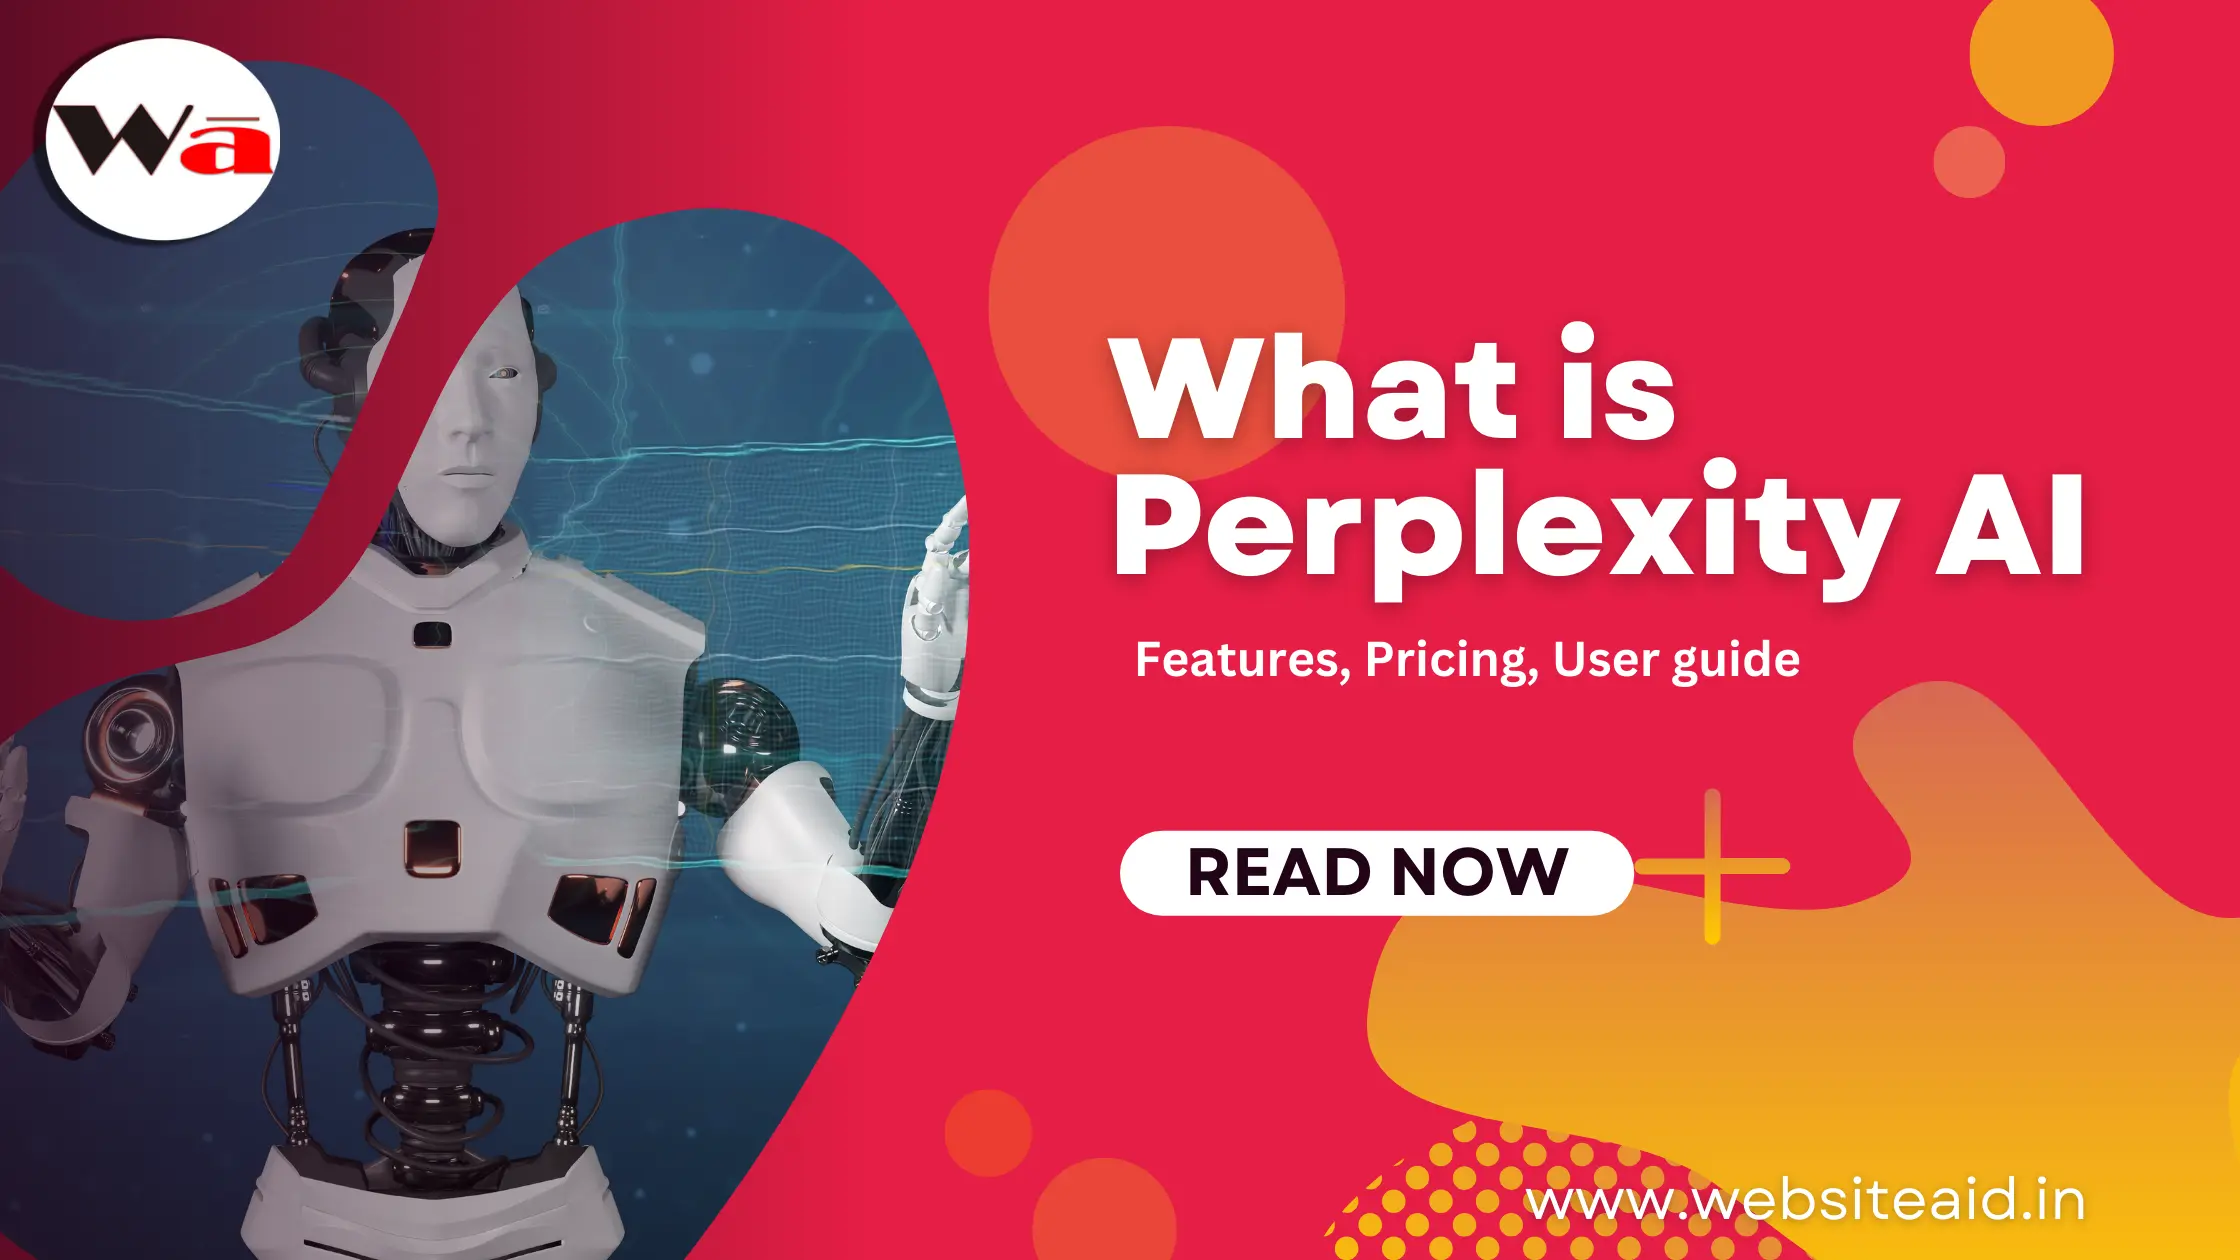 What is Perplexity AI, features, pricing